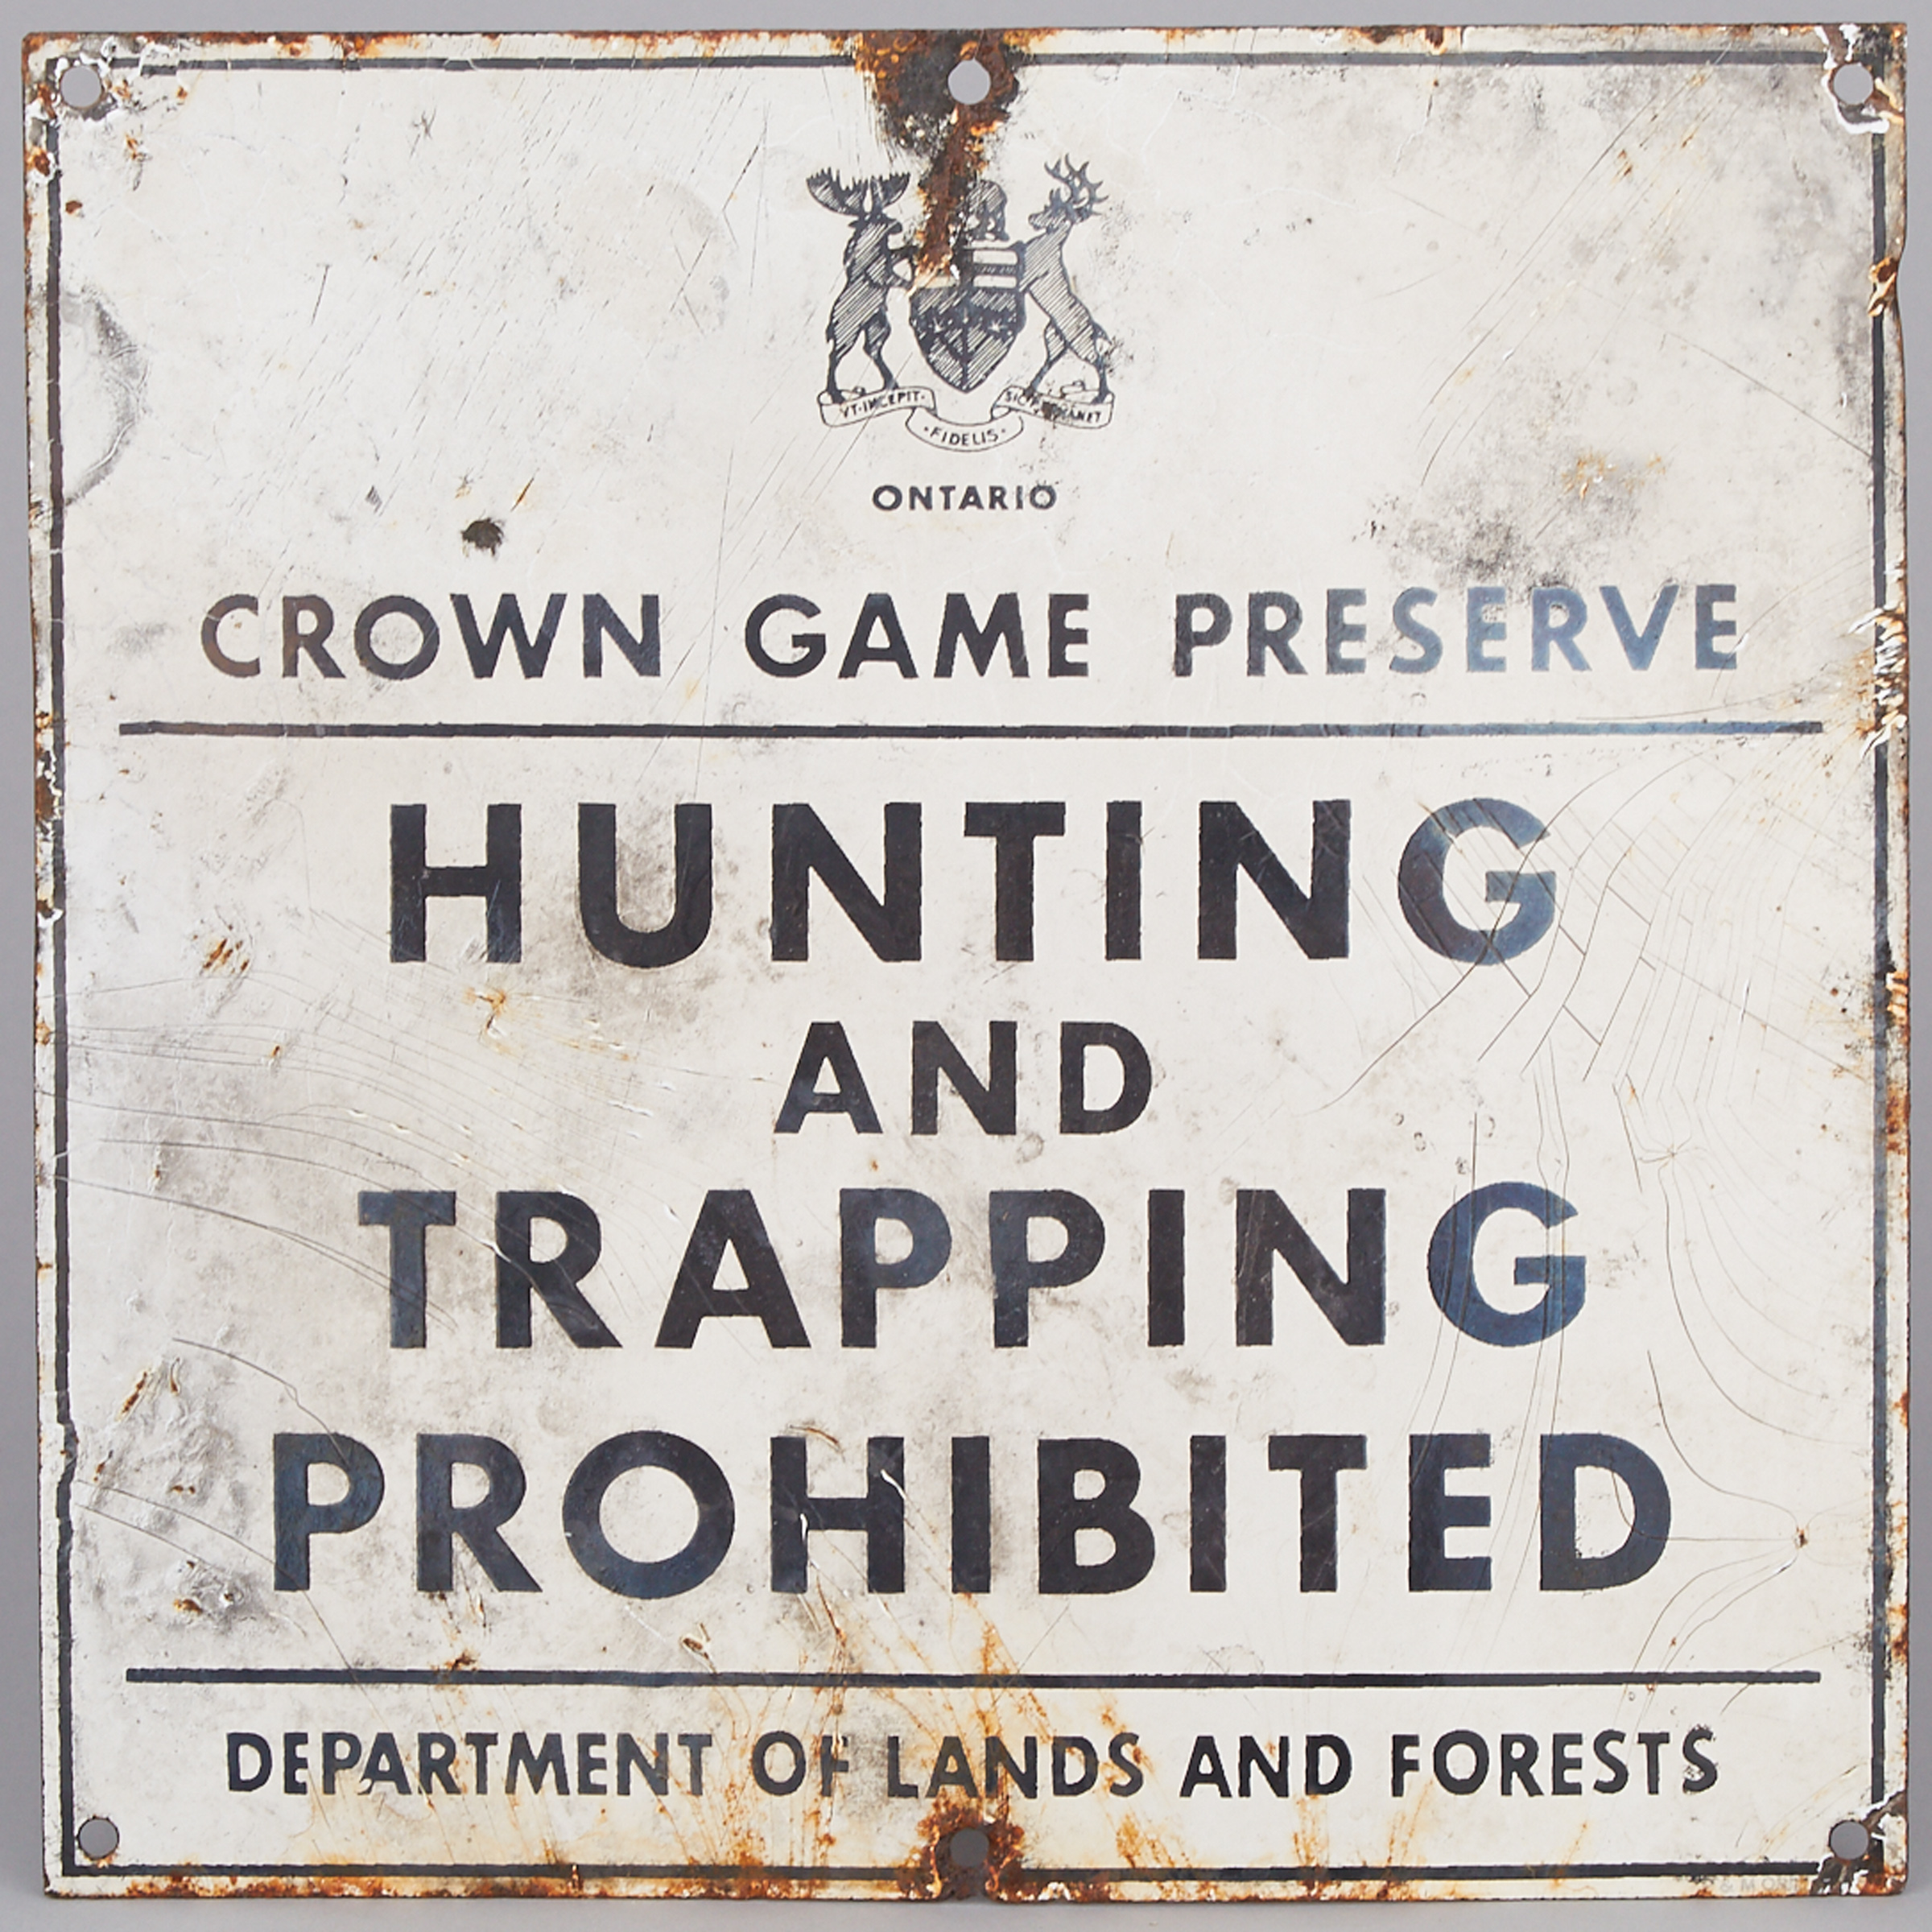 Ontario Department of Lands and Forests Crown Game Preserve No Hunting Sign, mid 20th century